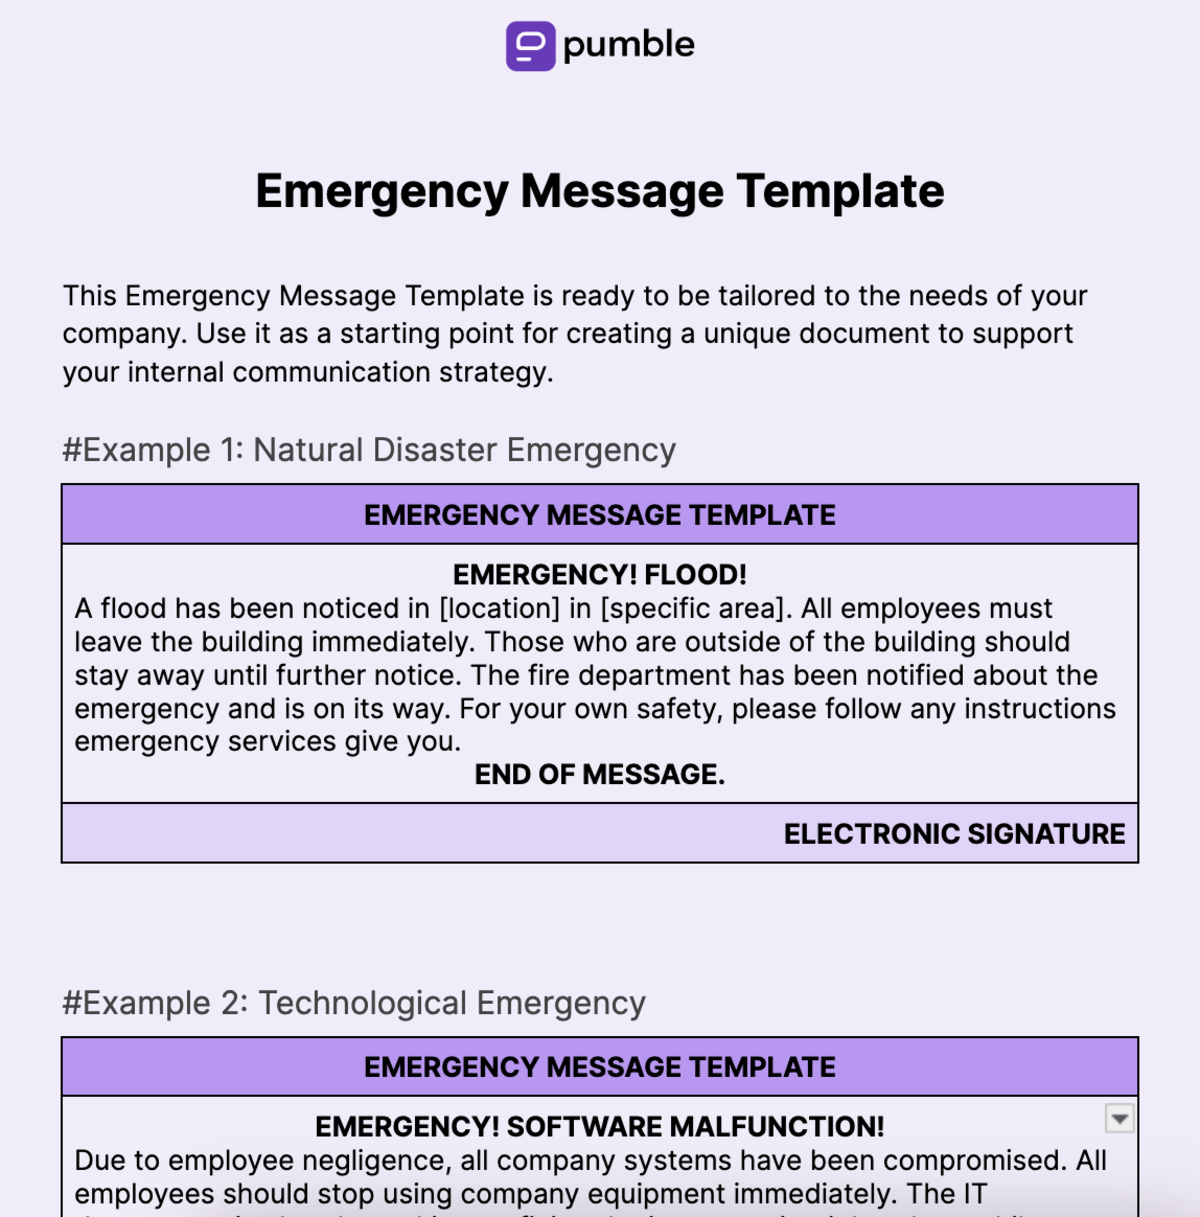 Emergency Message Template